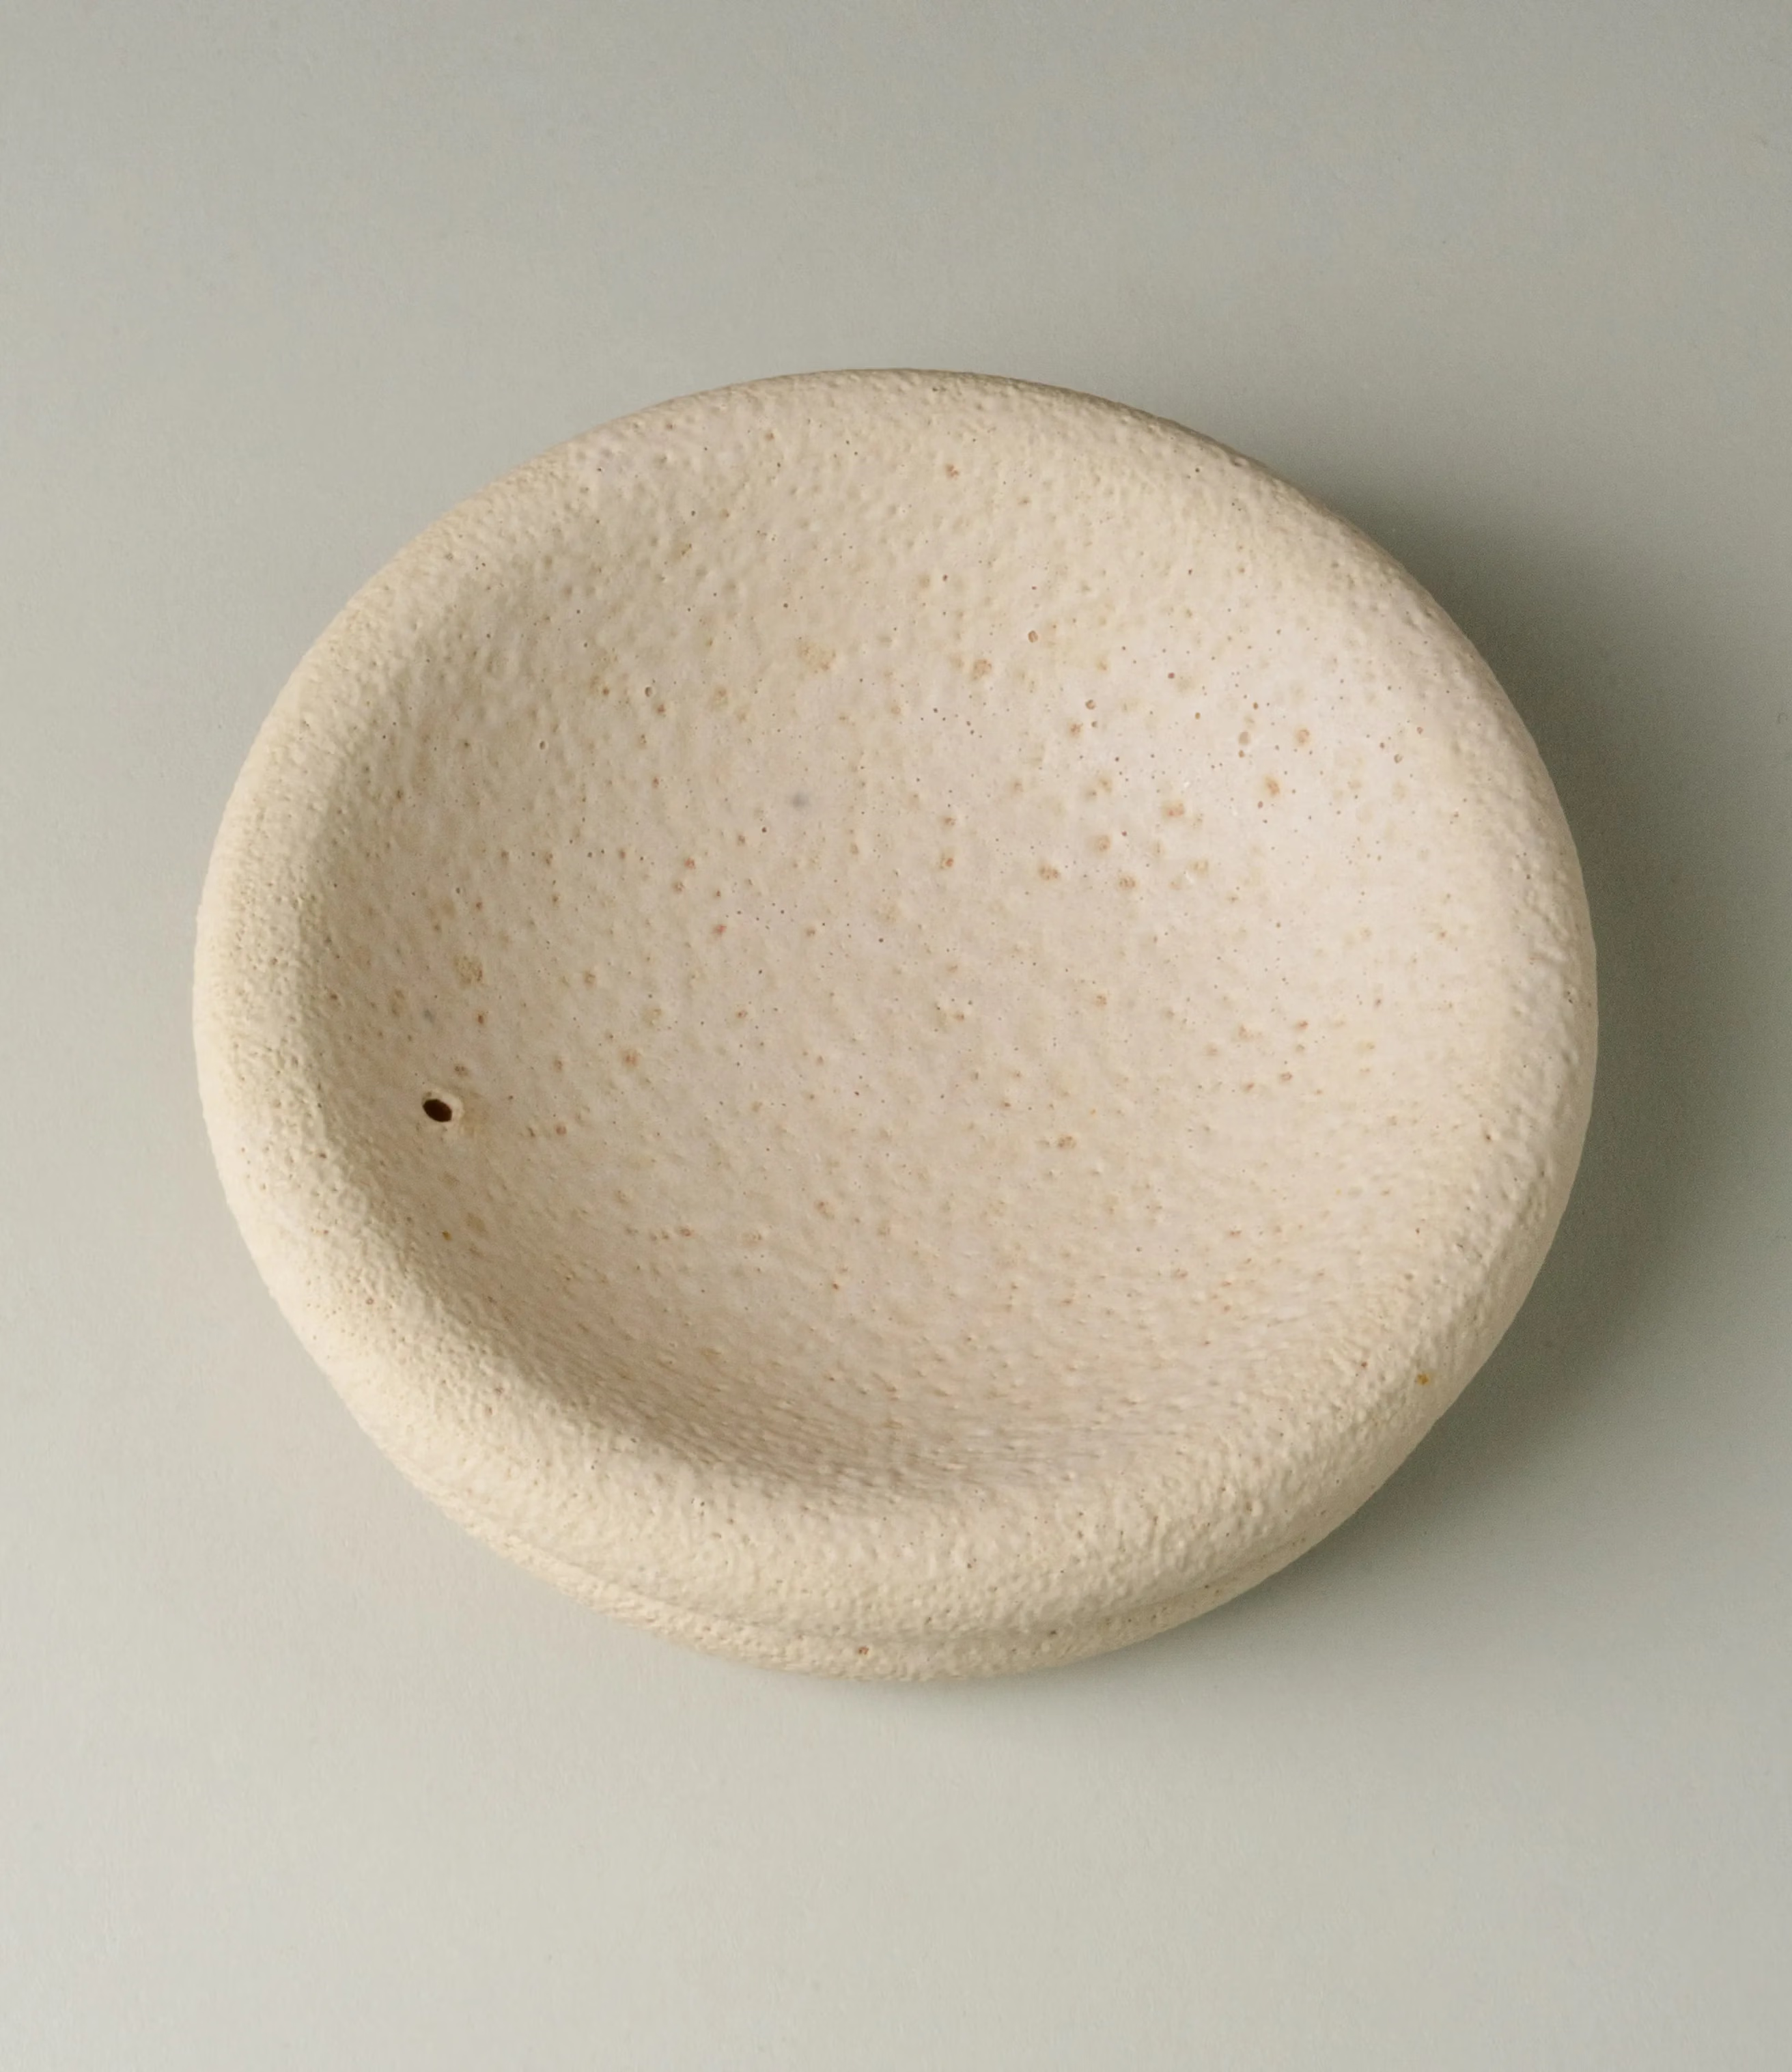 Lyot Incense Holder designed by Ocactuu has a sand texture and comes in a light nude color. The rounded plate has the place for your incense close to the edge of it. The picture captures the product from the top.